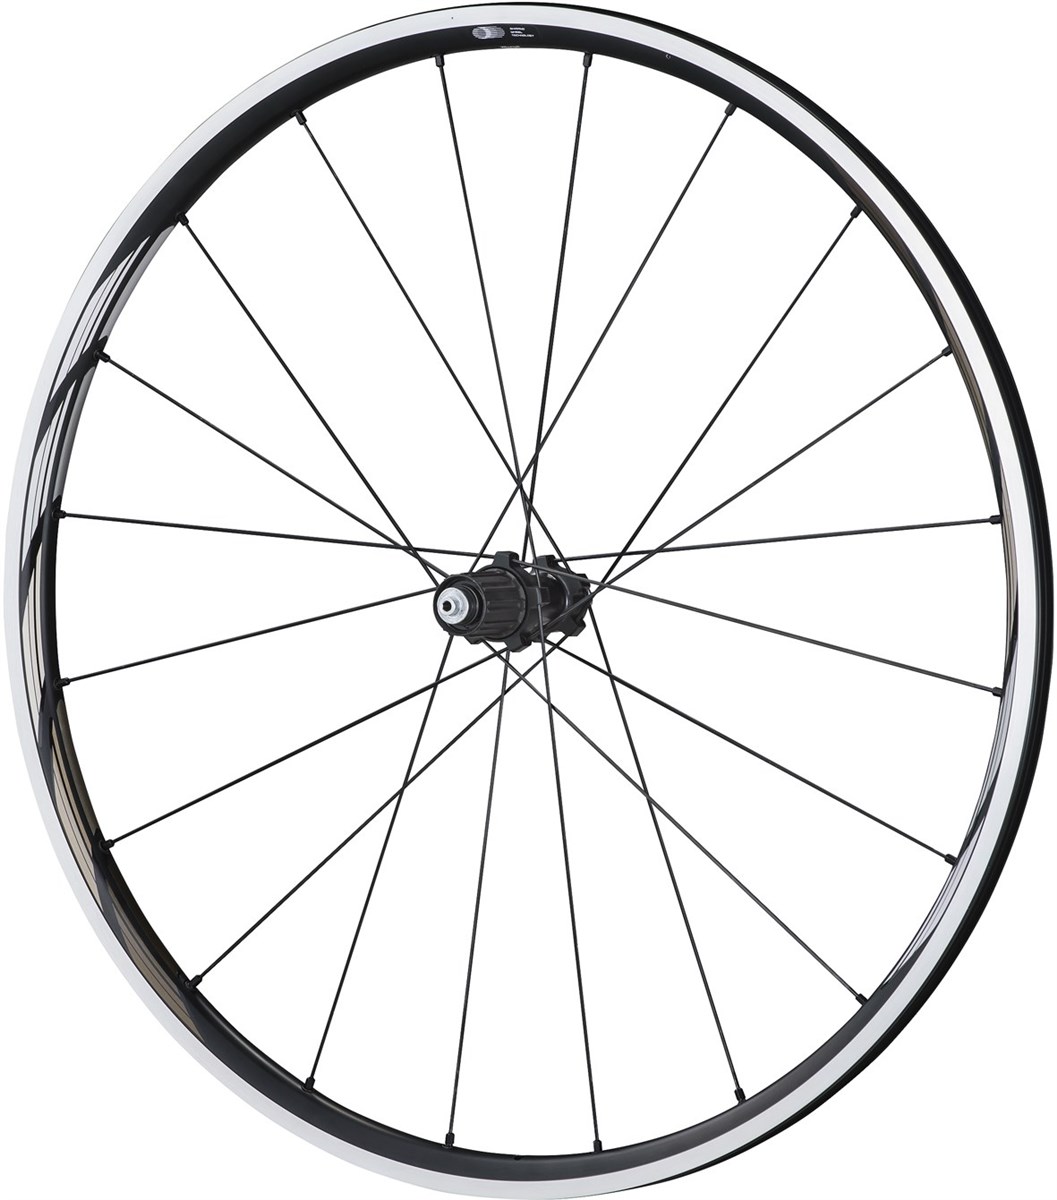 Shimano WH-RS610-TL Wheel - Tubeless Ready Clincher 24 mm - 11-Speed - Black - Rear product image